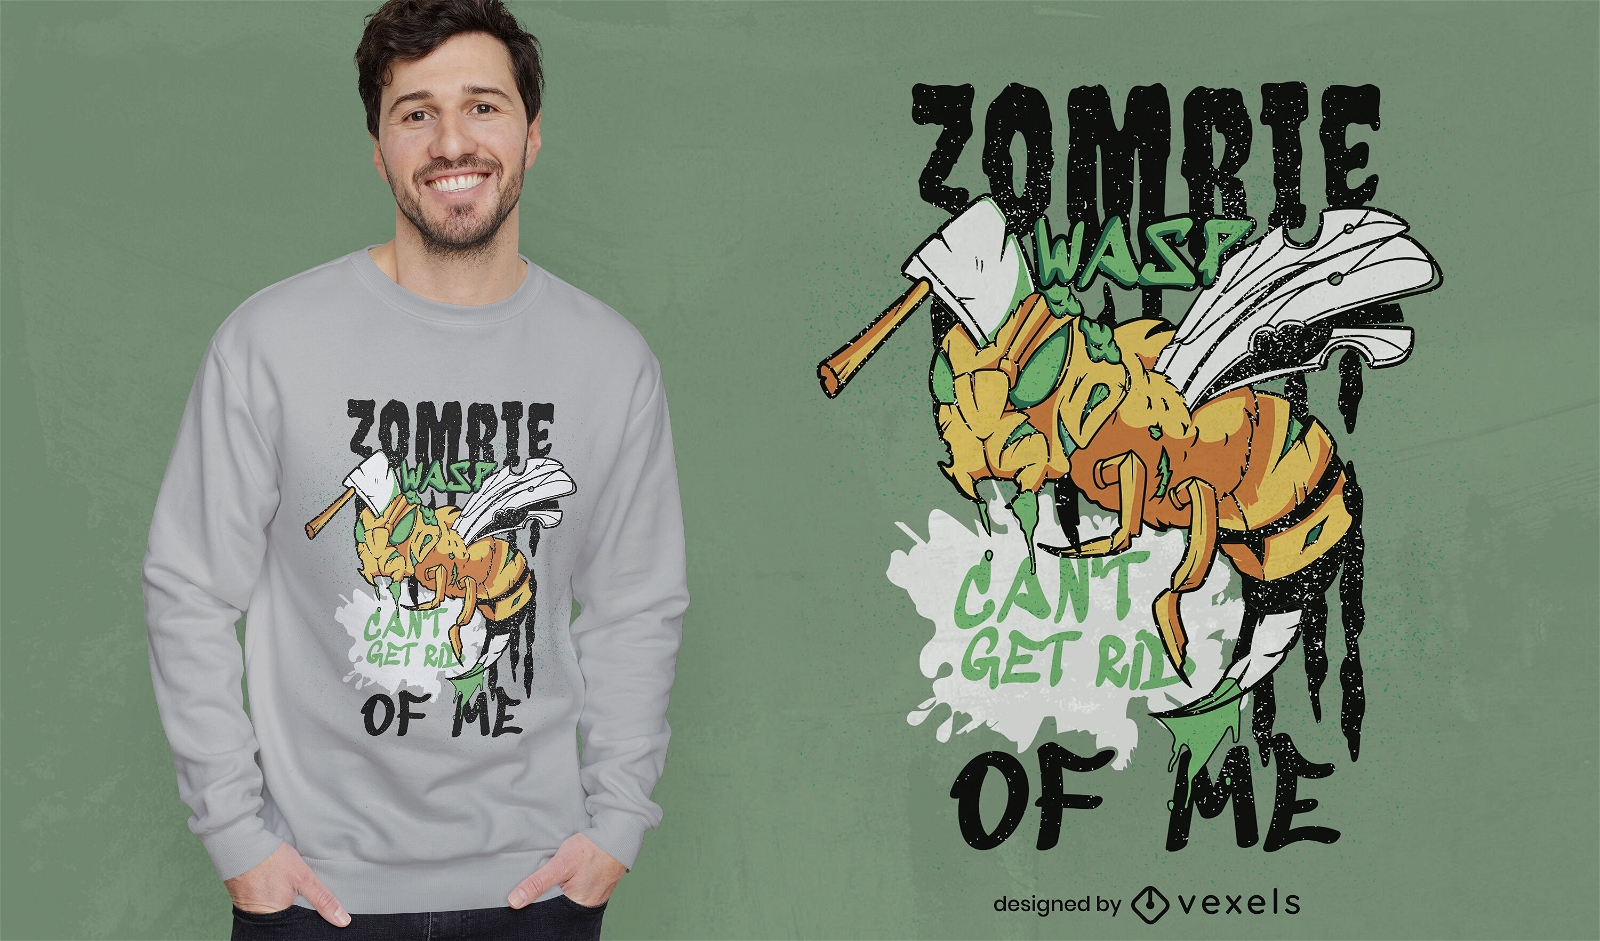 Zombie wasp quote t-shirt design